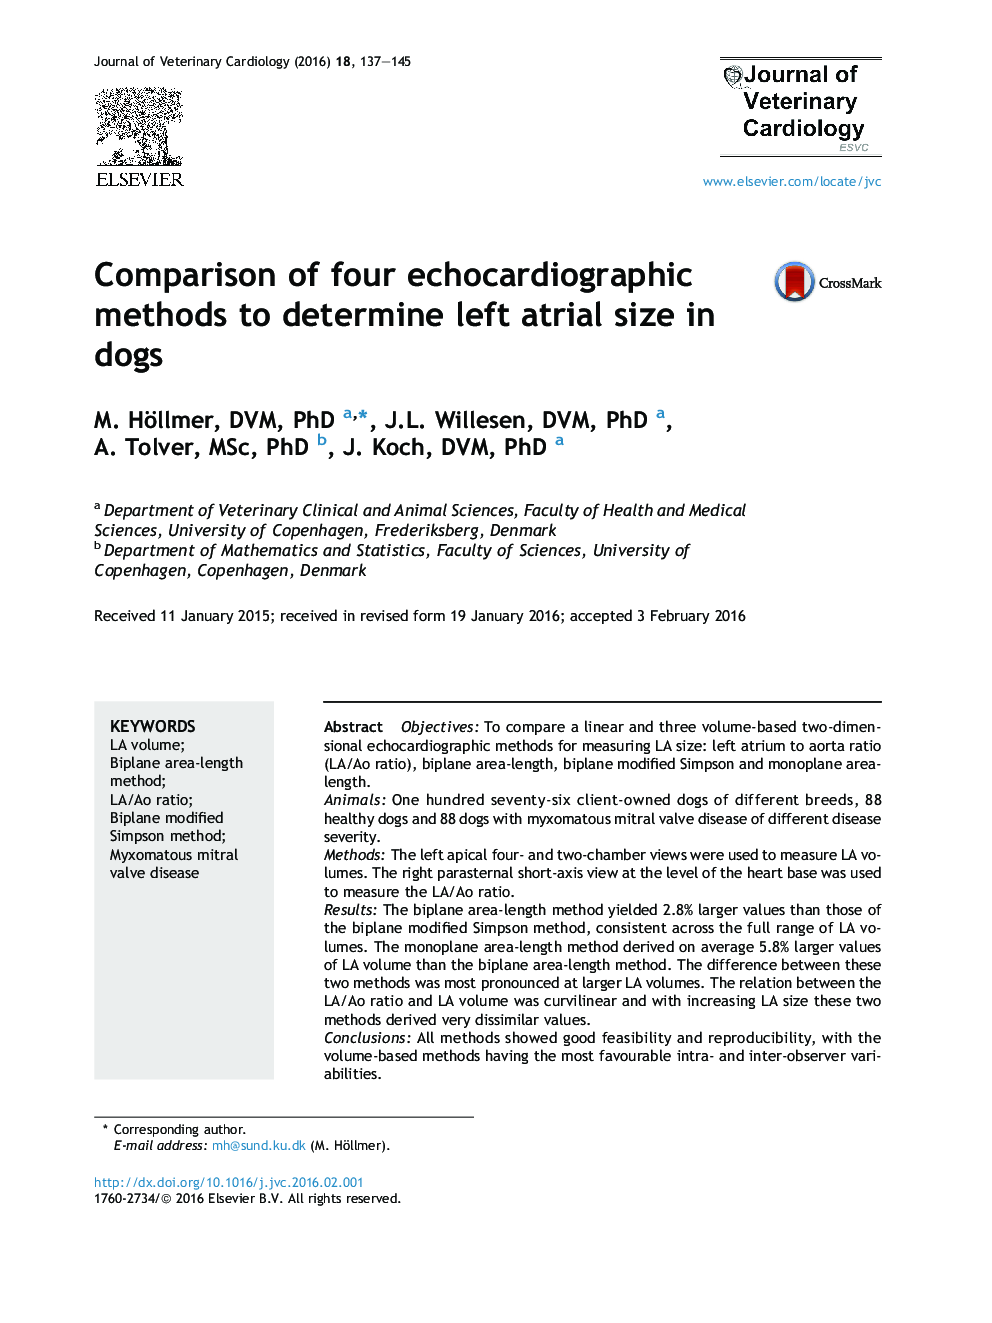 Comparison of four echocardiographic methods to determine left atrial size in dogs